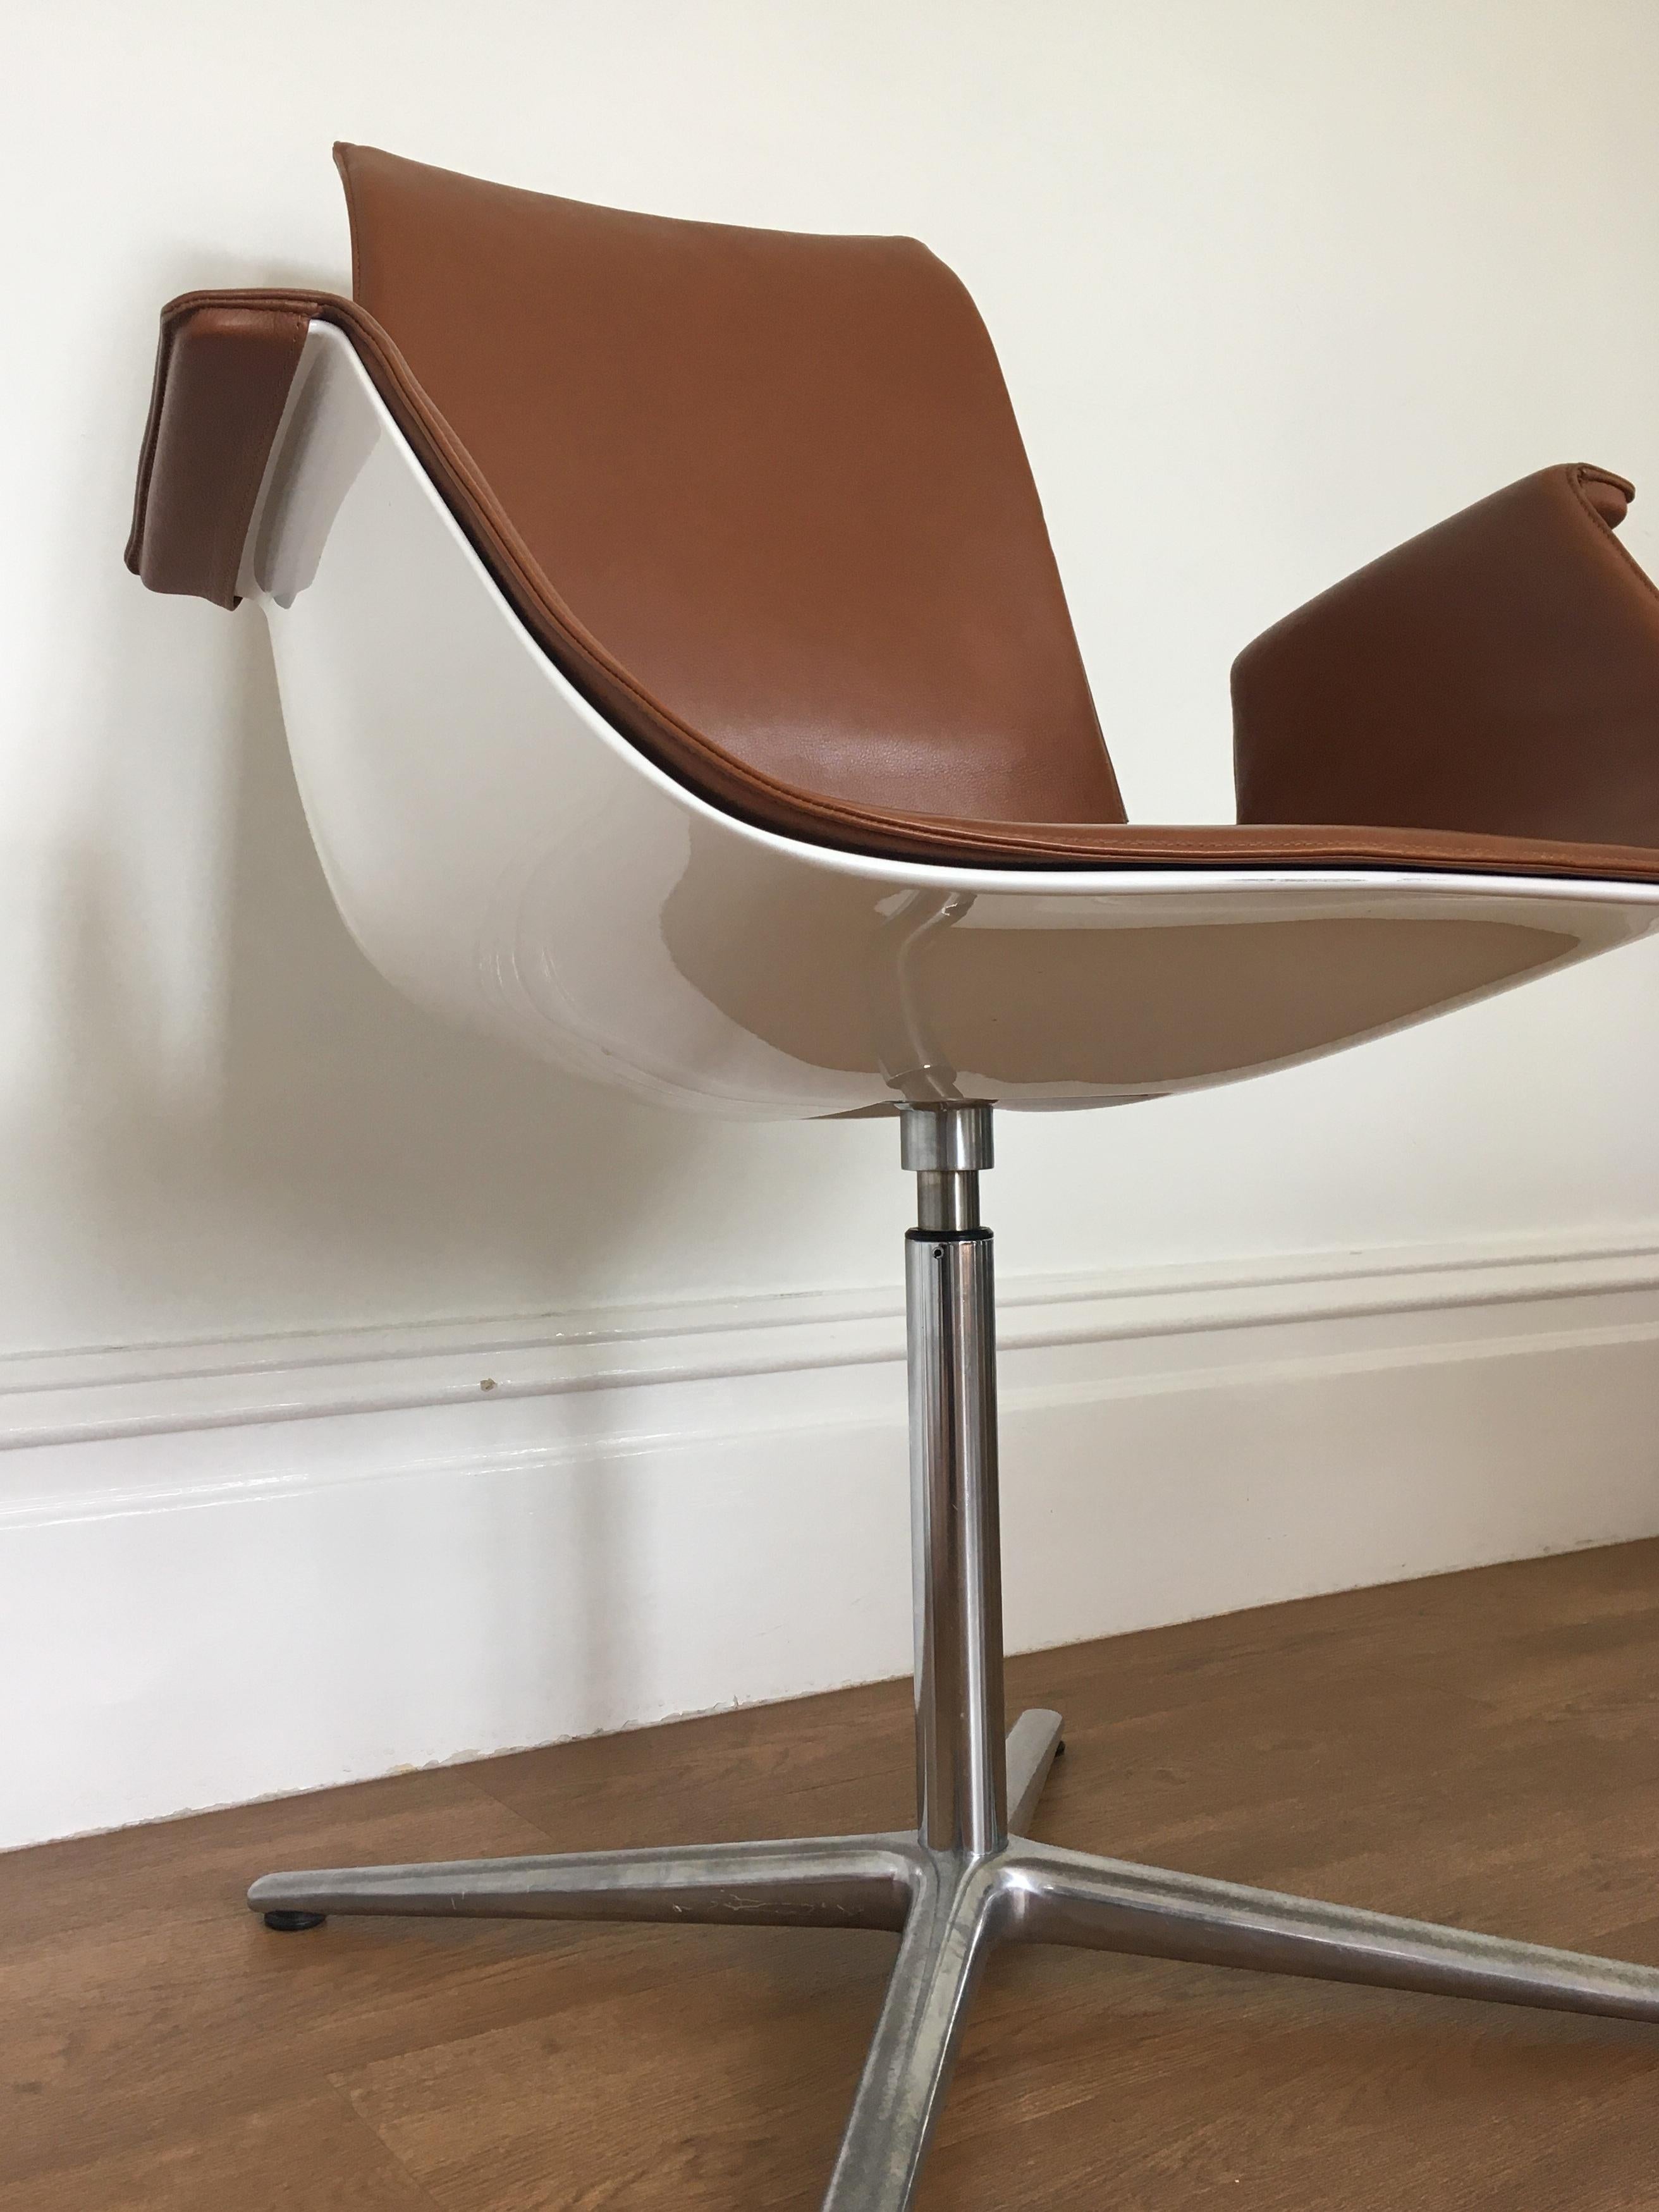 Fabricius & Kastholm Fk Bucket Chair for Walter Knoll In Good Condition For Sale In Solihull, GB